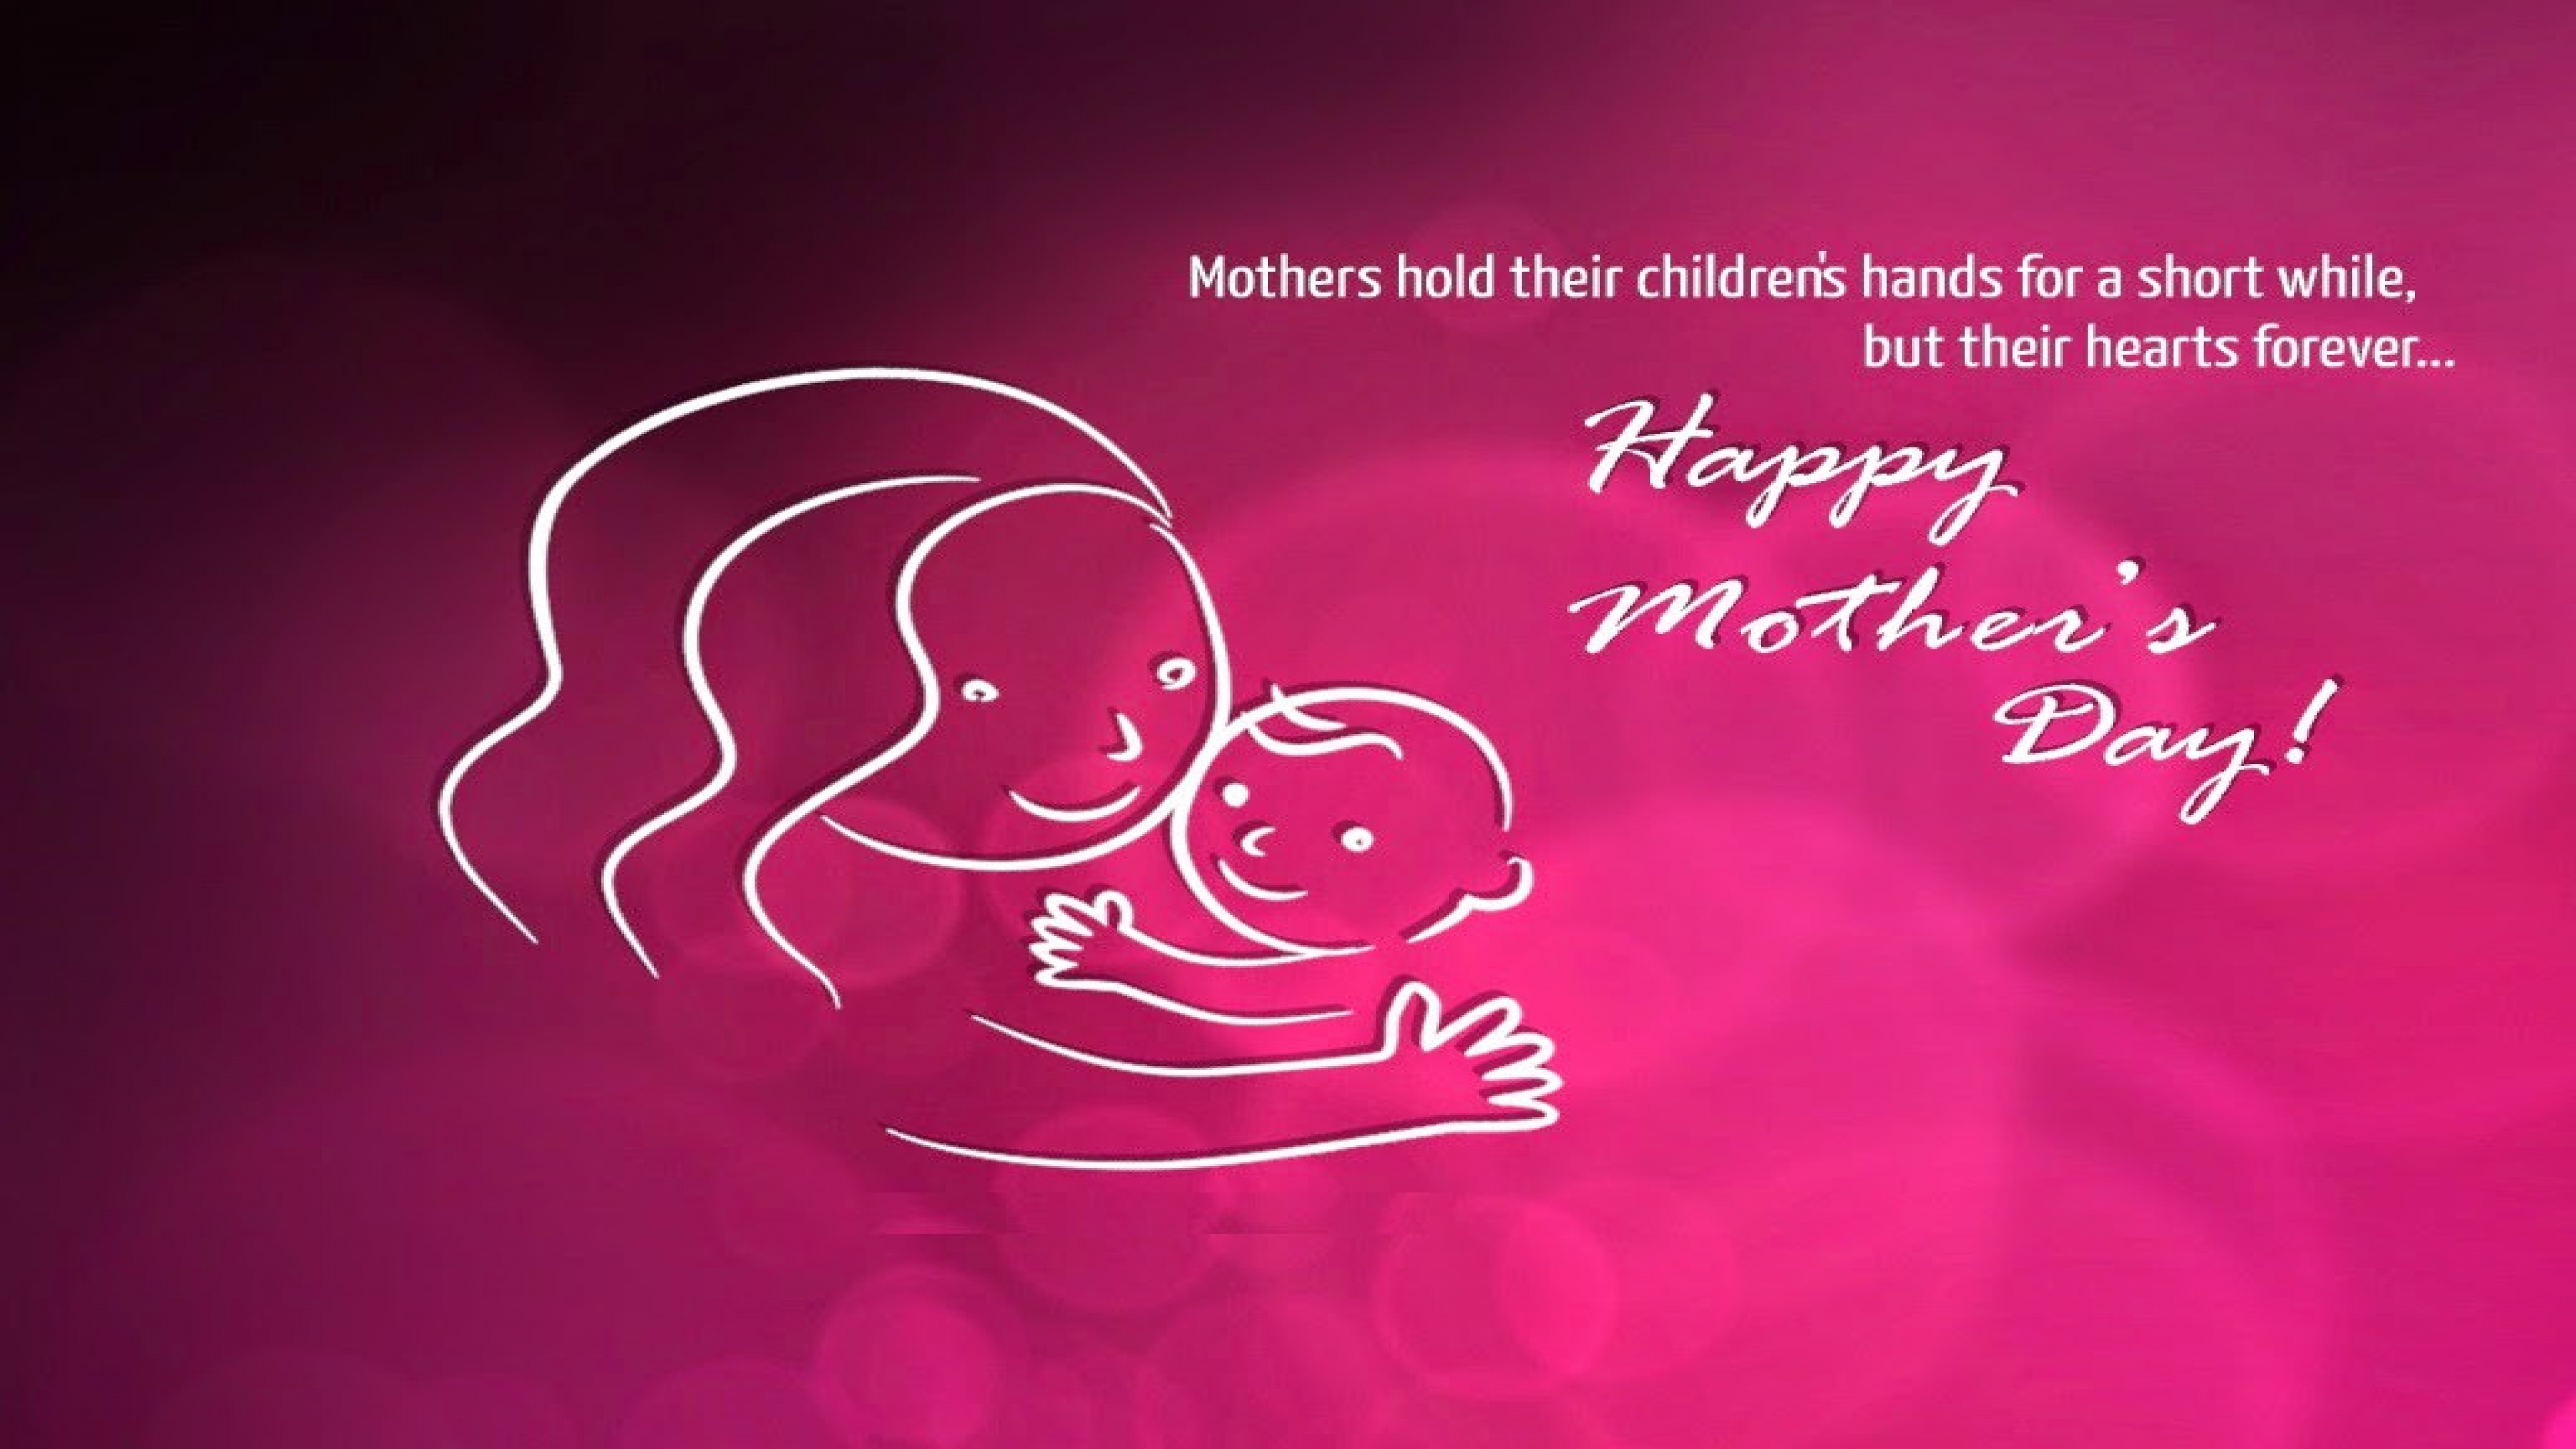 Happy Mothers Day Greeting Card Image To Share